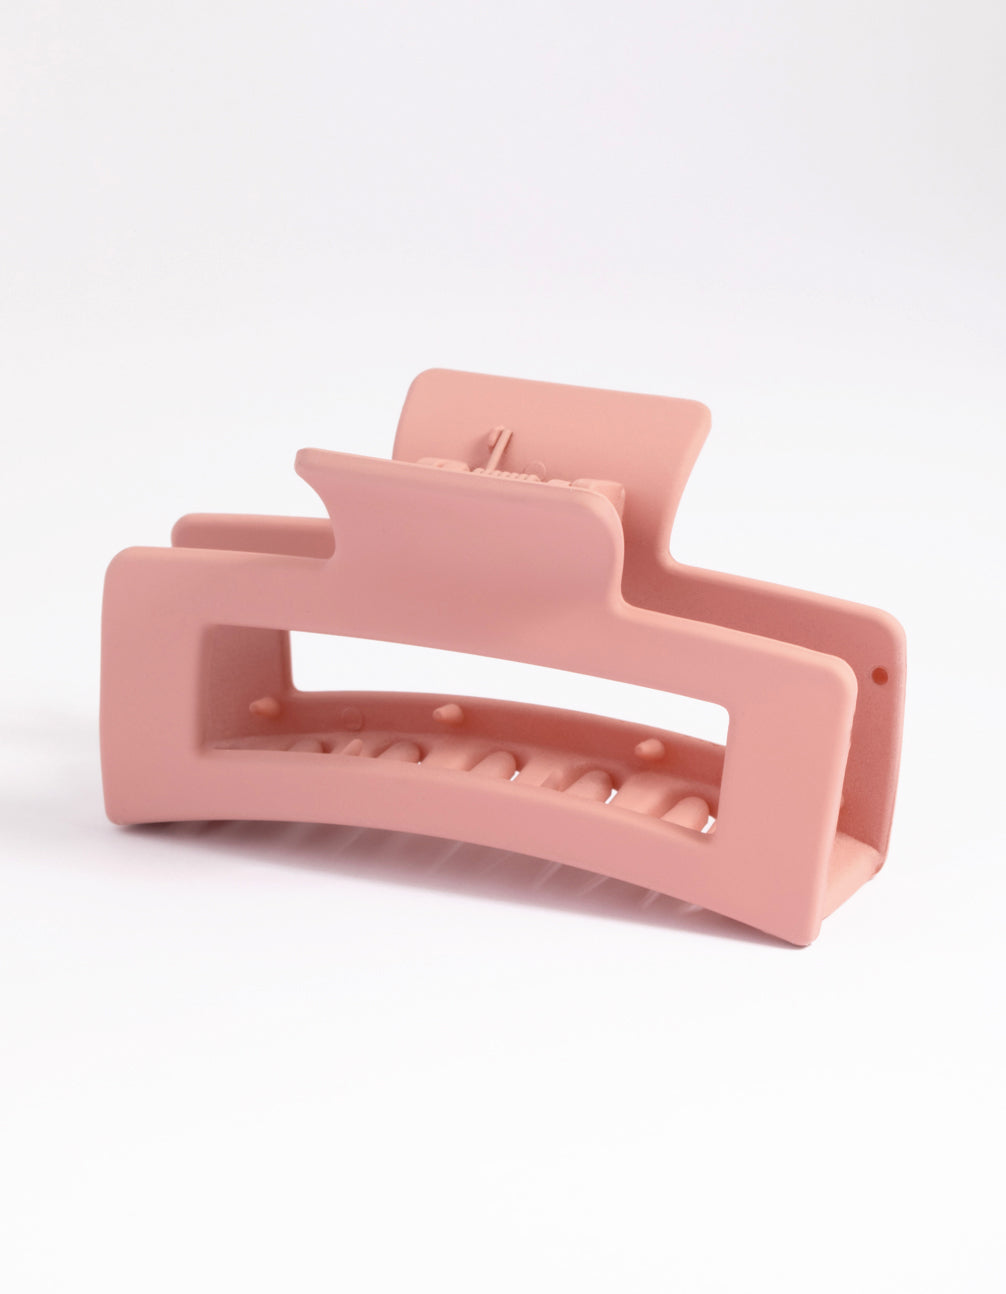 Blush Pink Large Coated Box Claw Clip